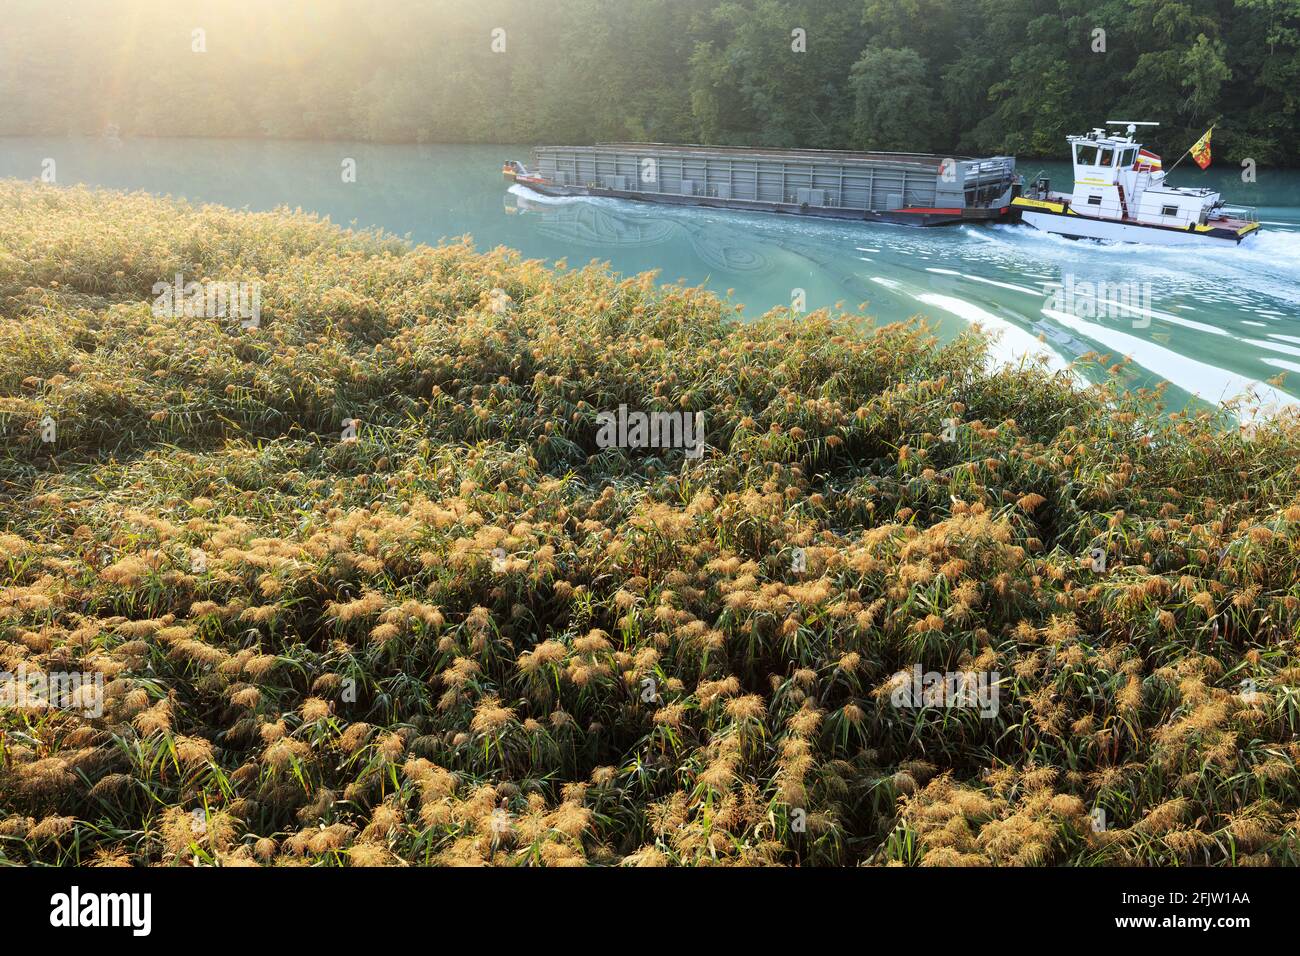 Switzerland, Canton of Geneva, Vernier, navigation of a barge on the Rhone river Stock Photo